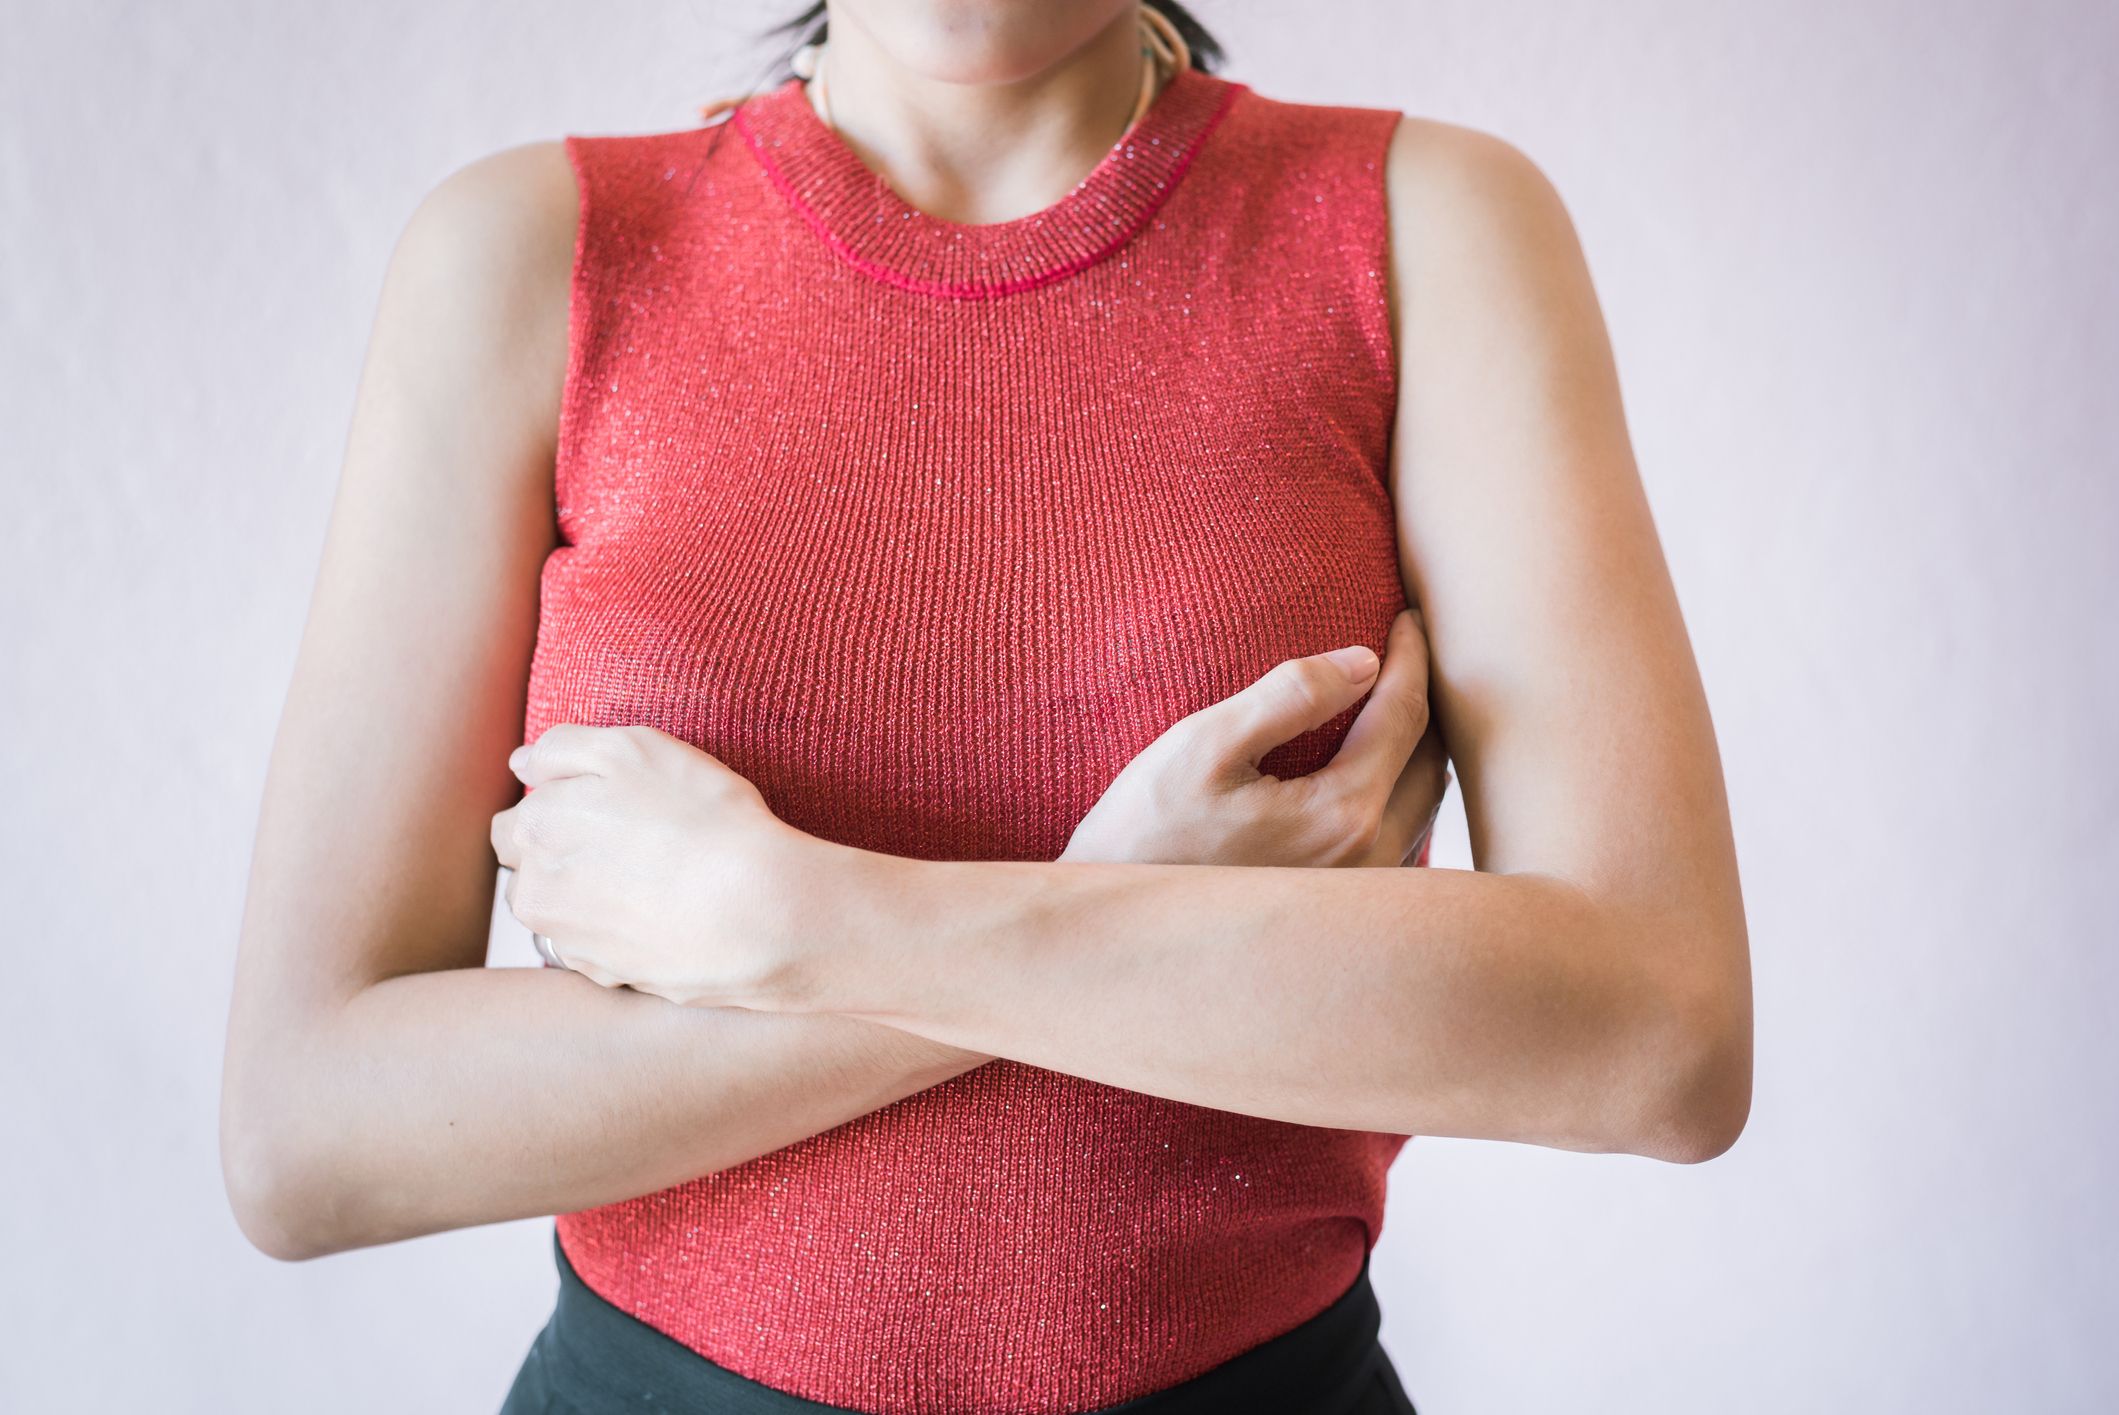 The 5 things your itchy boobs are trying to tell you - and when to